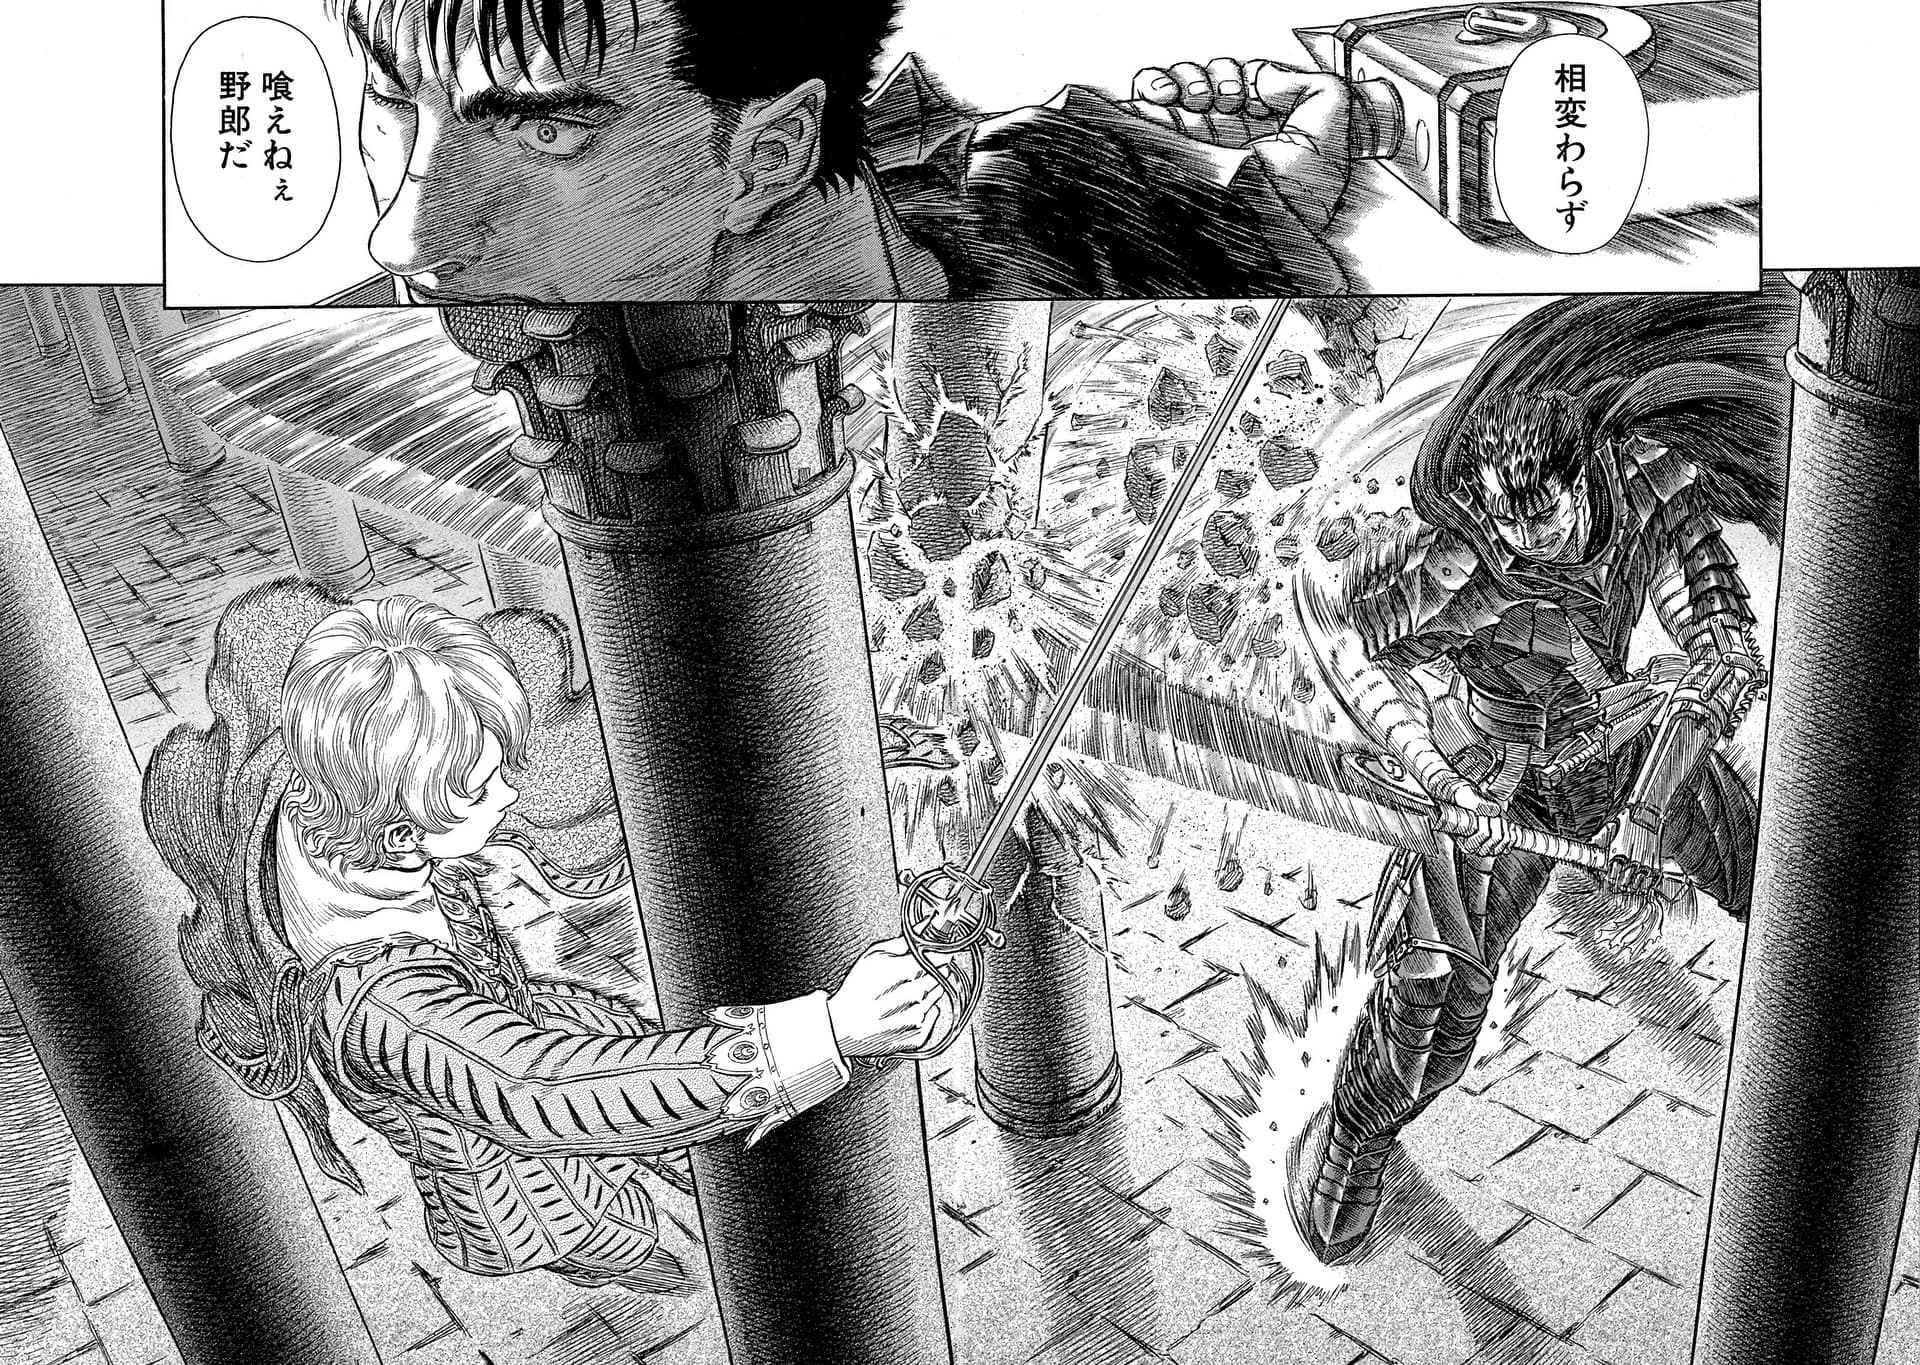 https://static.wikia.nocookie.net/berserk/images/c/c1/Manga_E256_Duel_Begins.png/revision/latest/scale-to-width-down/1920?cb=20190421211649